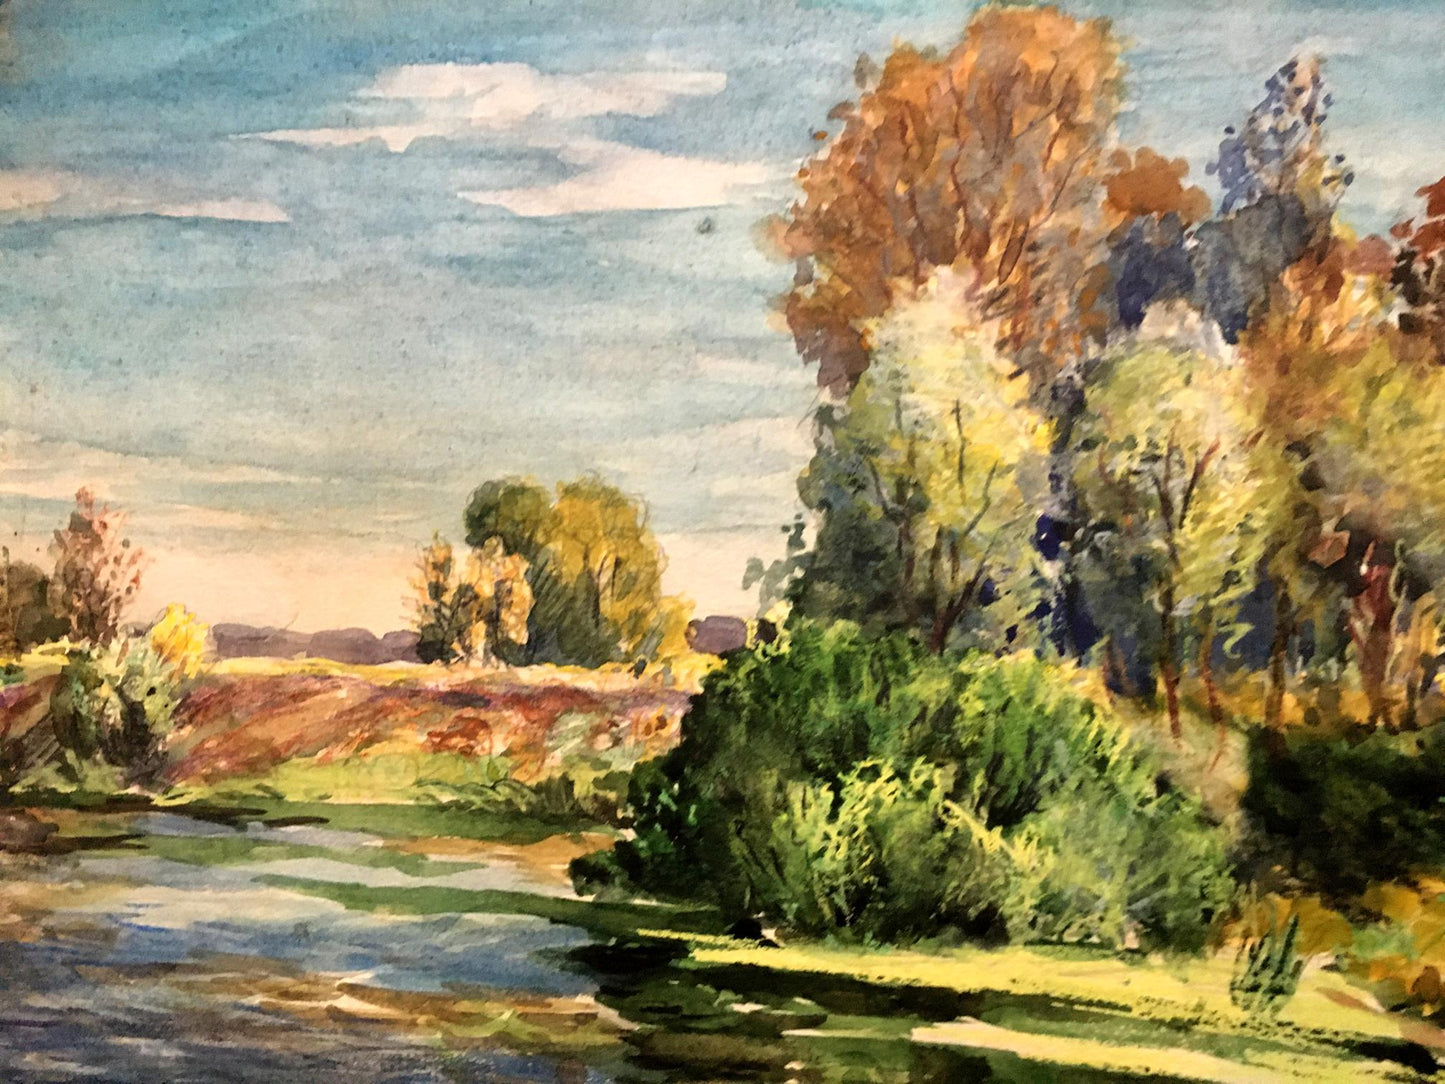 Watercolor painting Lake by the path Cherkas A.G.